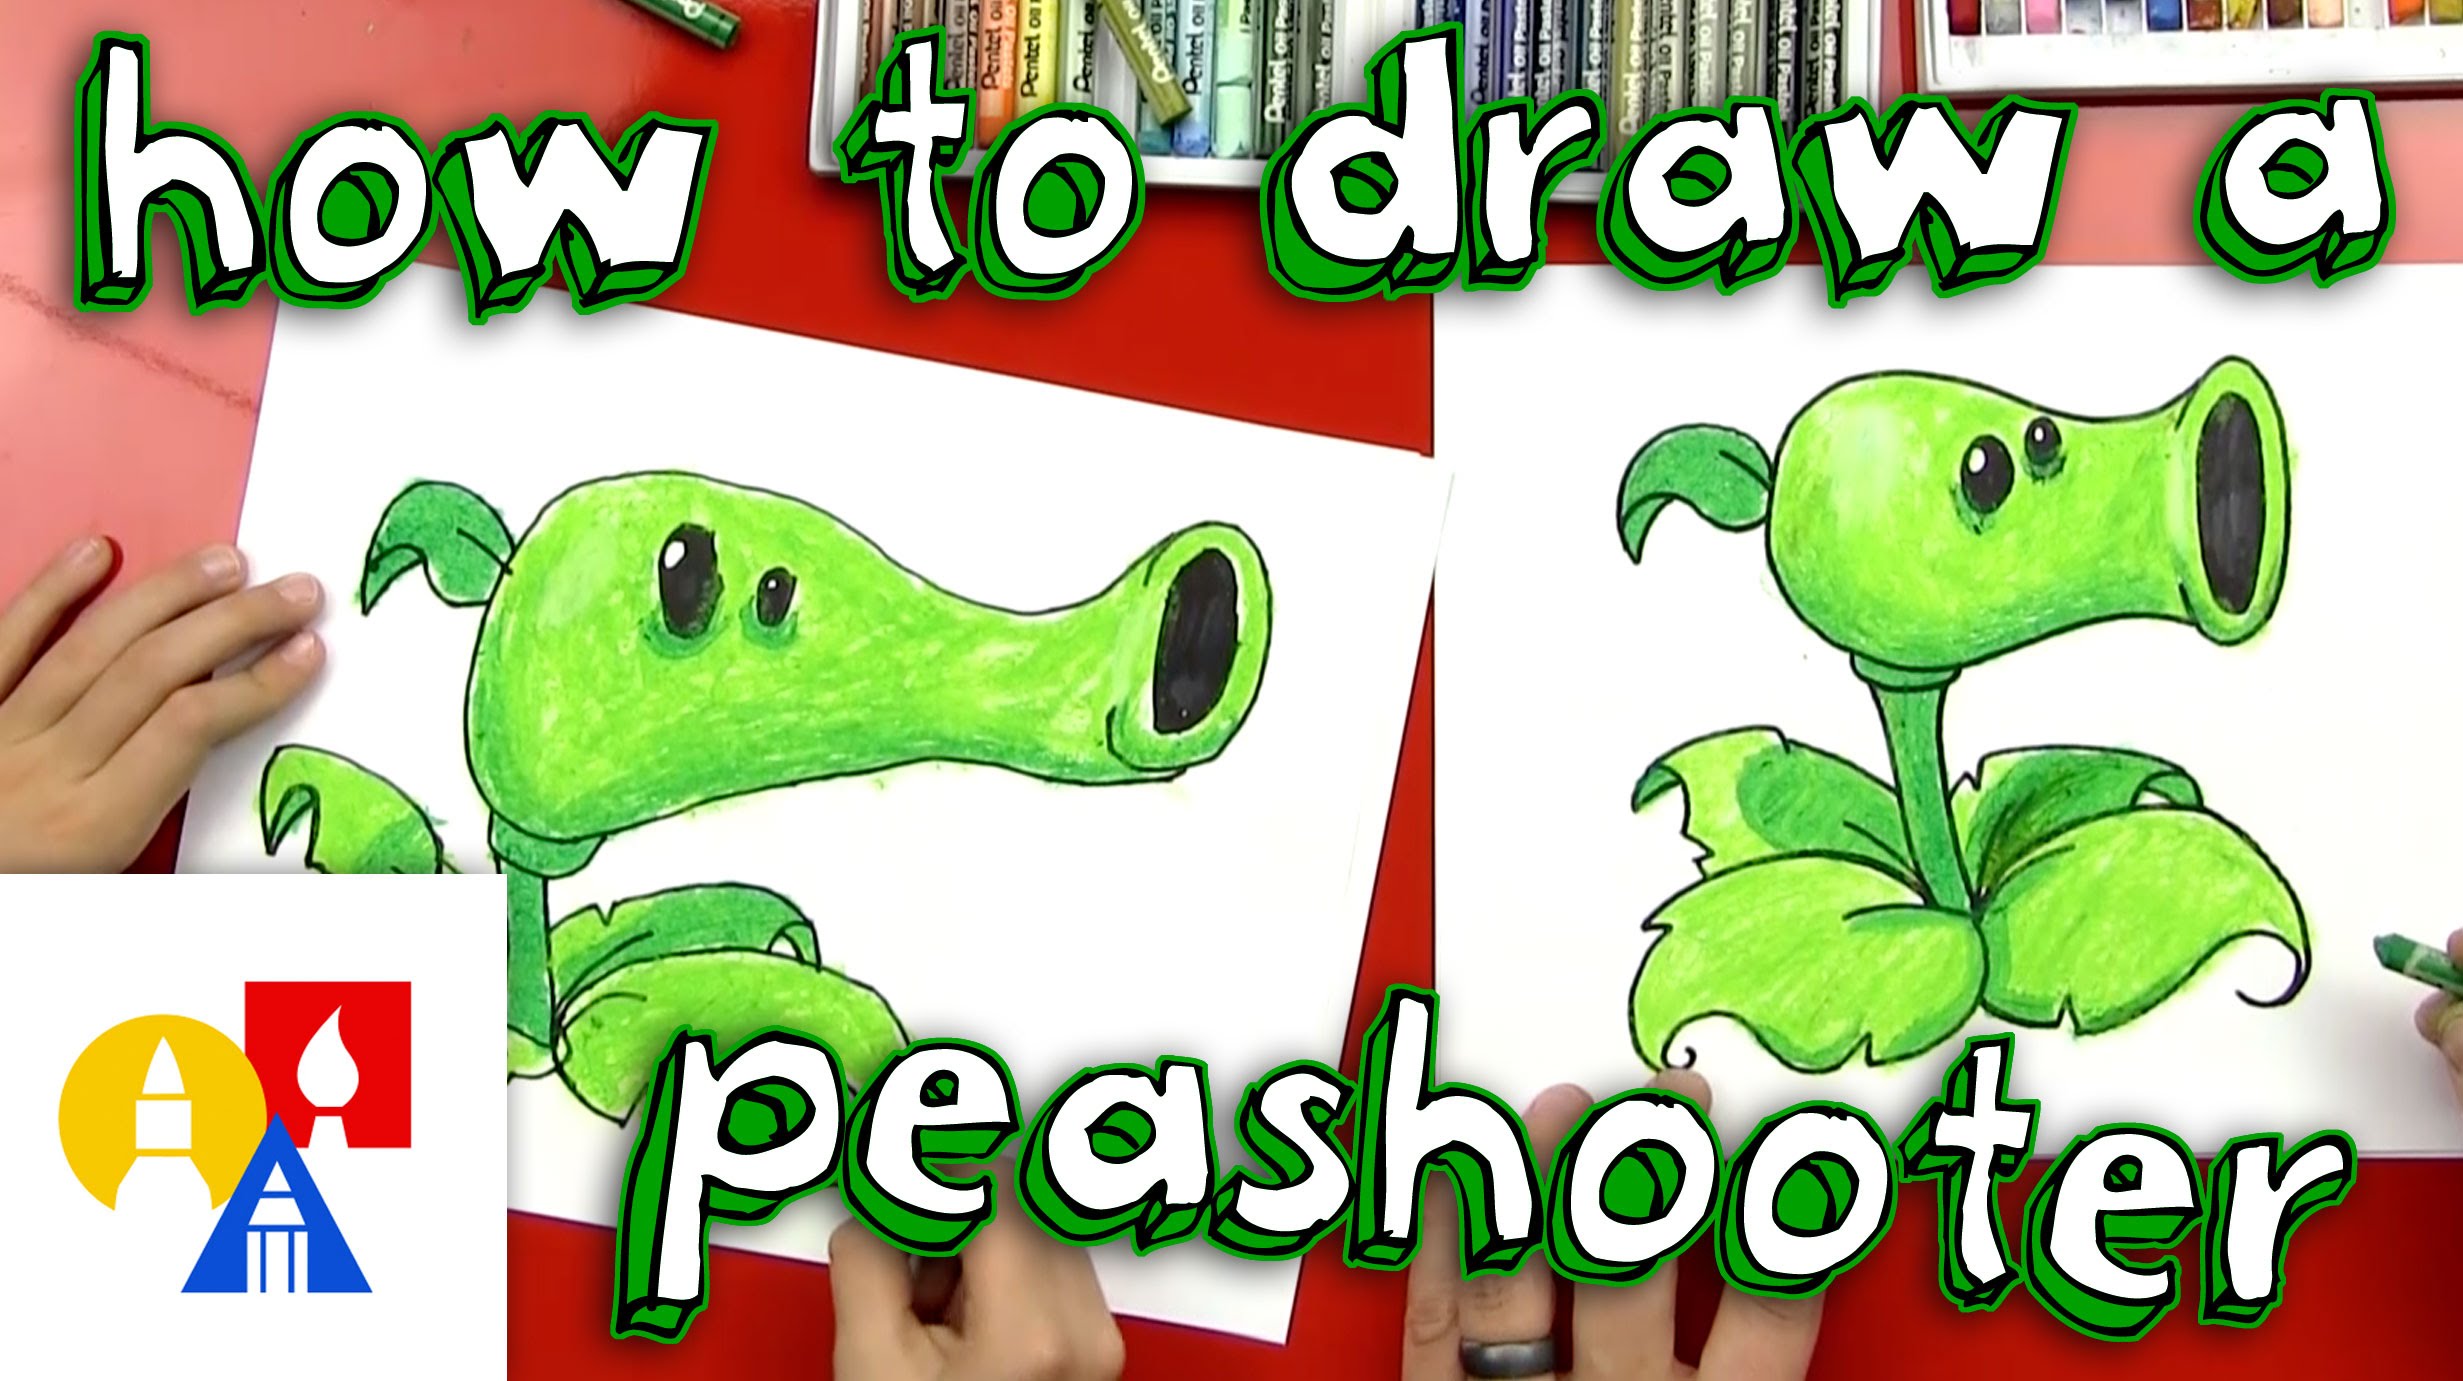 How To Draw A Peashooter (Plants vs Zombies) - YouTube